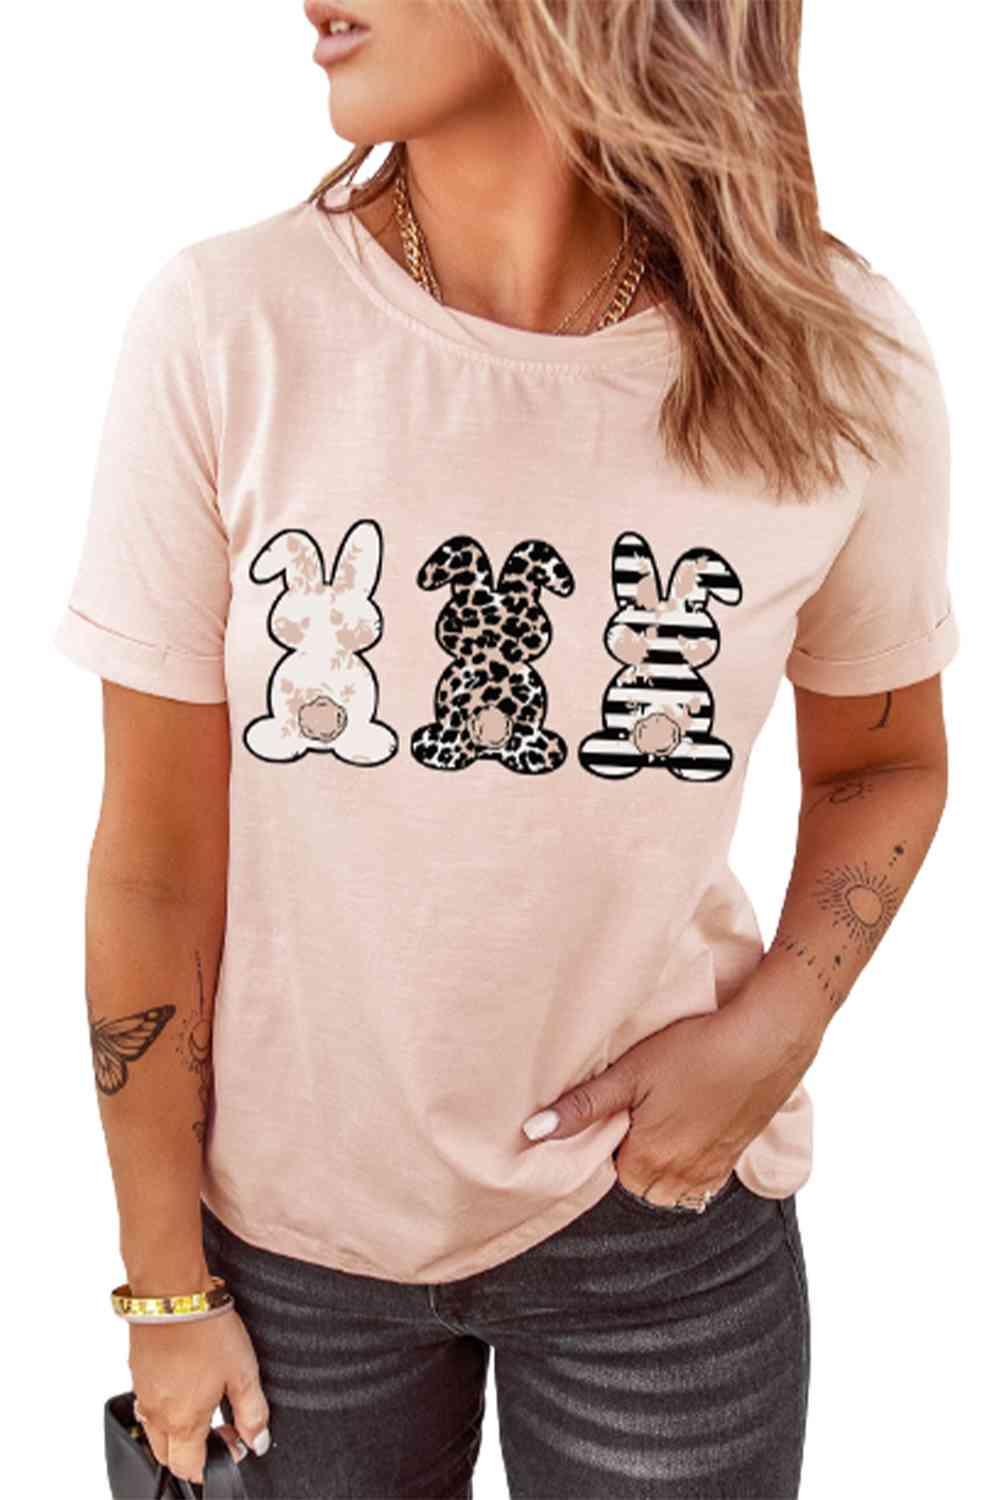 Easter Bunny Graphic Cuffed Tee Shirt - Olive Ave